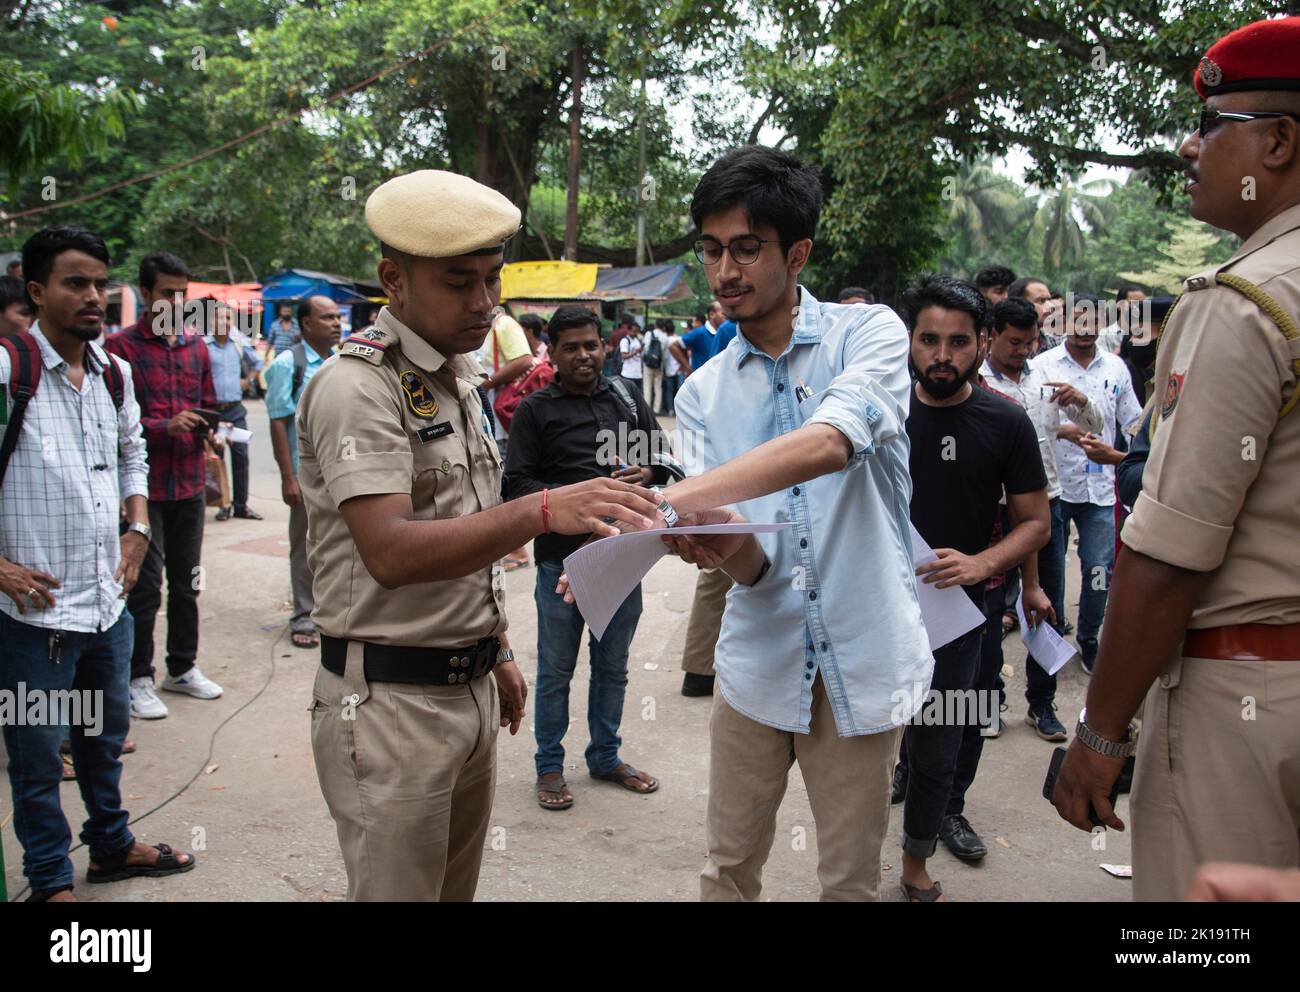 GUWAHATI, INDIA - AUGUST 28: A police person checks wrist watch of an aspirant before enter an examination hall for Recruitment of Class III and IV posts, at a examination centre on August 28, 2022 in  Guwahati, India. More than 1.4 million candidates are expected to appear for nearly 30,000 Grade-III and -IV posts in Assam. Mobile internet services across 25 districts of Assam have been suspended during exam in order to prevent possible malpractices. Stock Photo